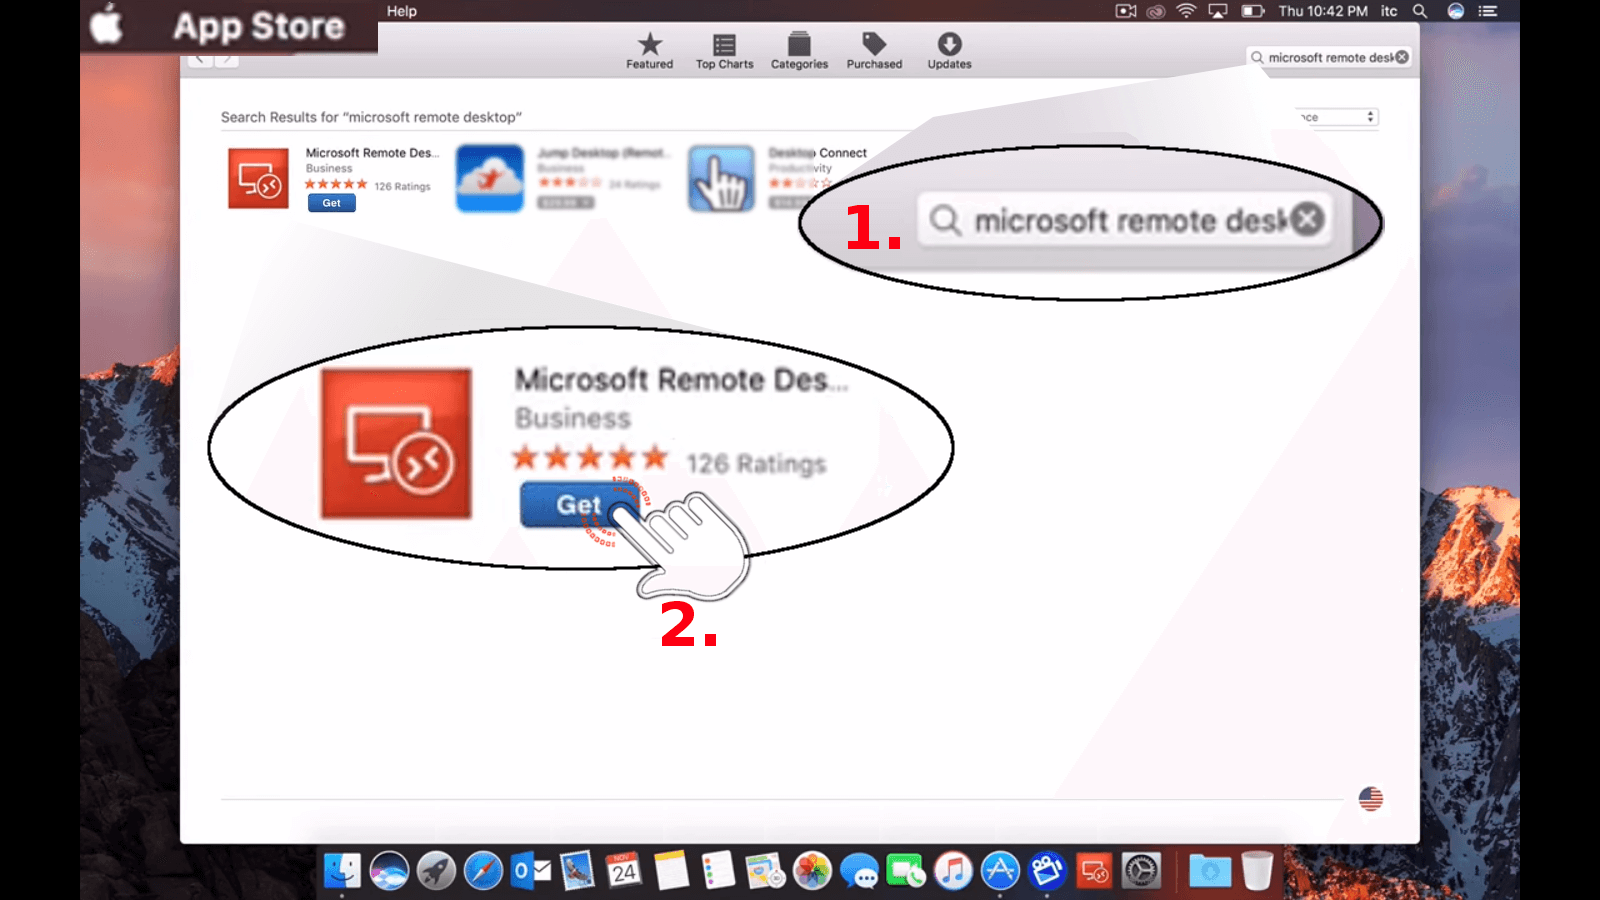 remote desktop connection client for mac from microsoft versions 2.0